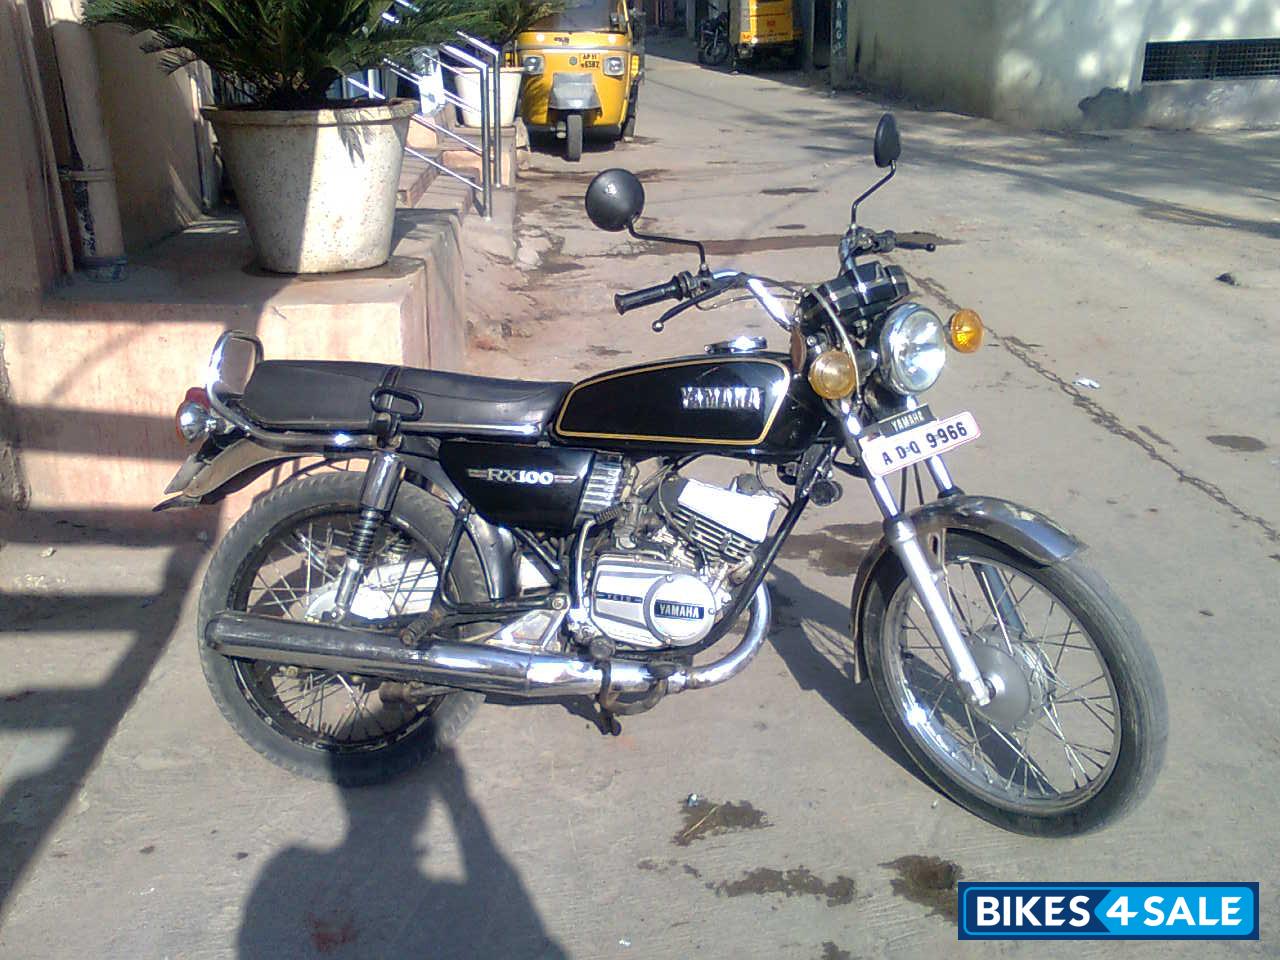 Used 19 Model Yamaha Rx 100 For Sale In Hyderabad Id 476 Black Colour Bikes4sale